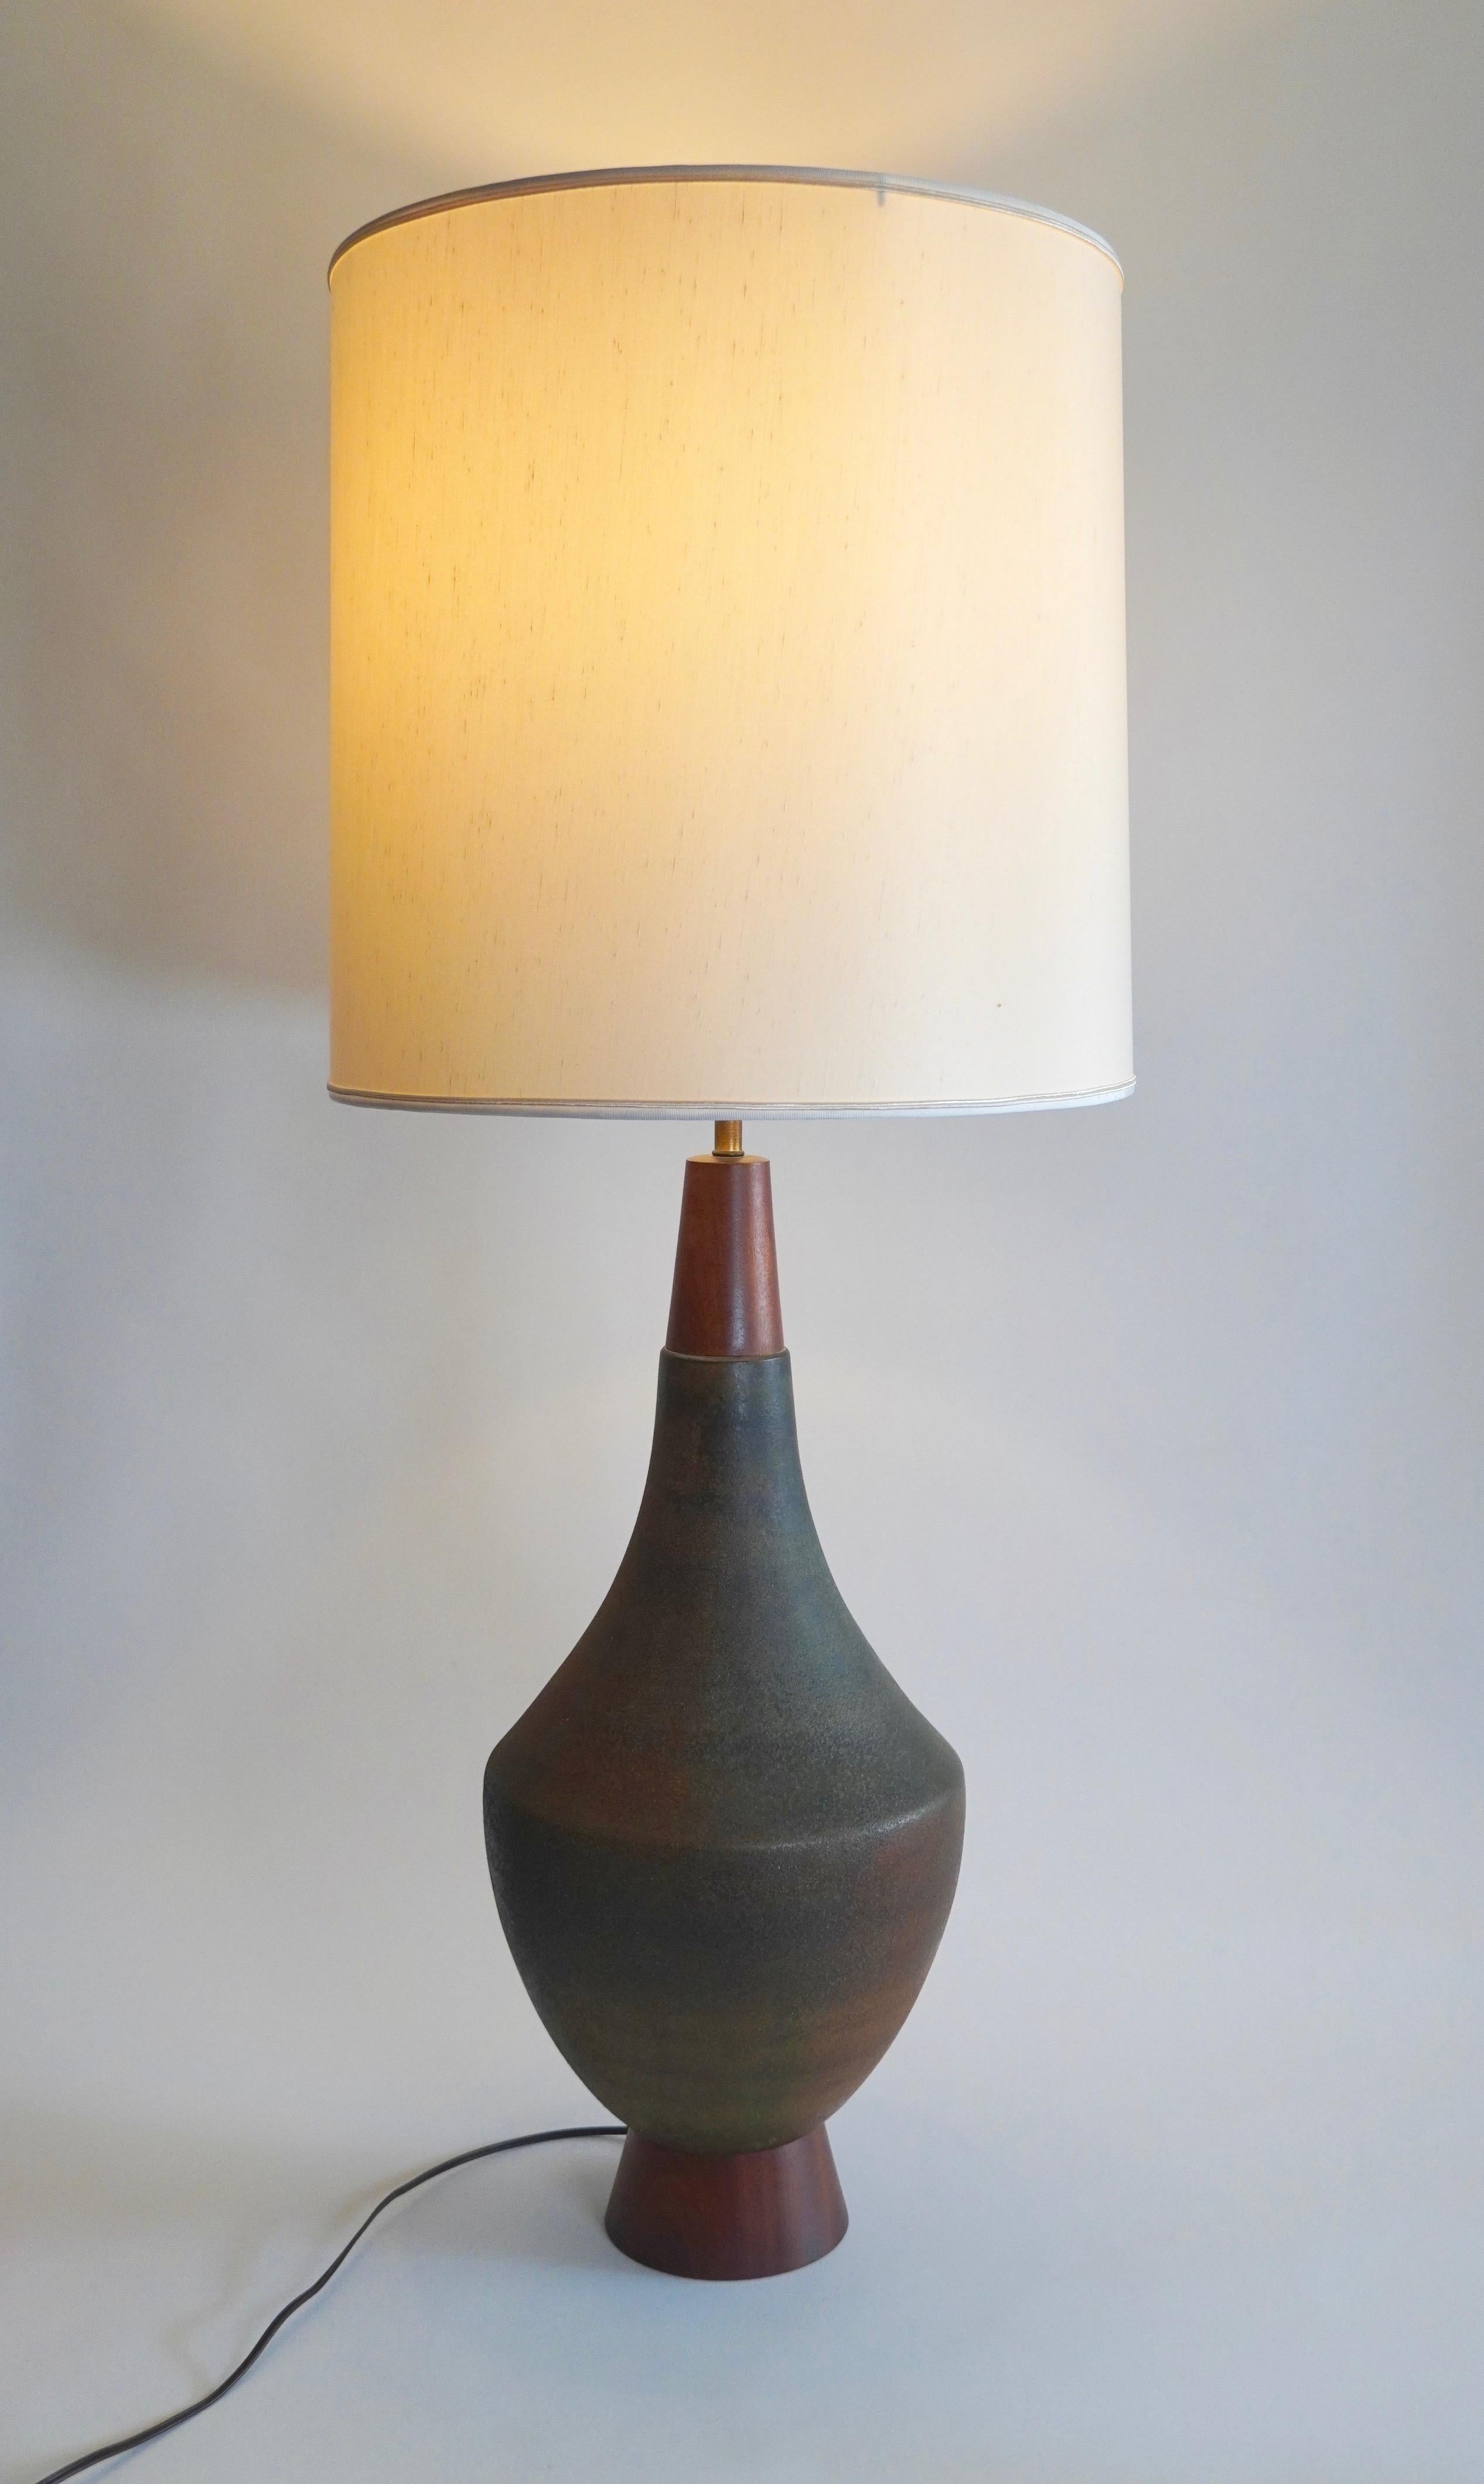 Large in scale is this rare ceramic and walnut table lamp designed by Aldo Londi for Bitossi of Italy. Having a multi-colored soft volcanic glaze of burnt oranges and greens resting on a walnut base. The hardware is brass and is fully working, the